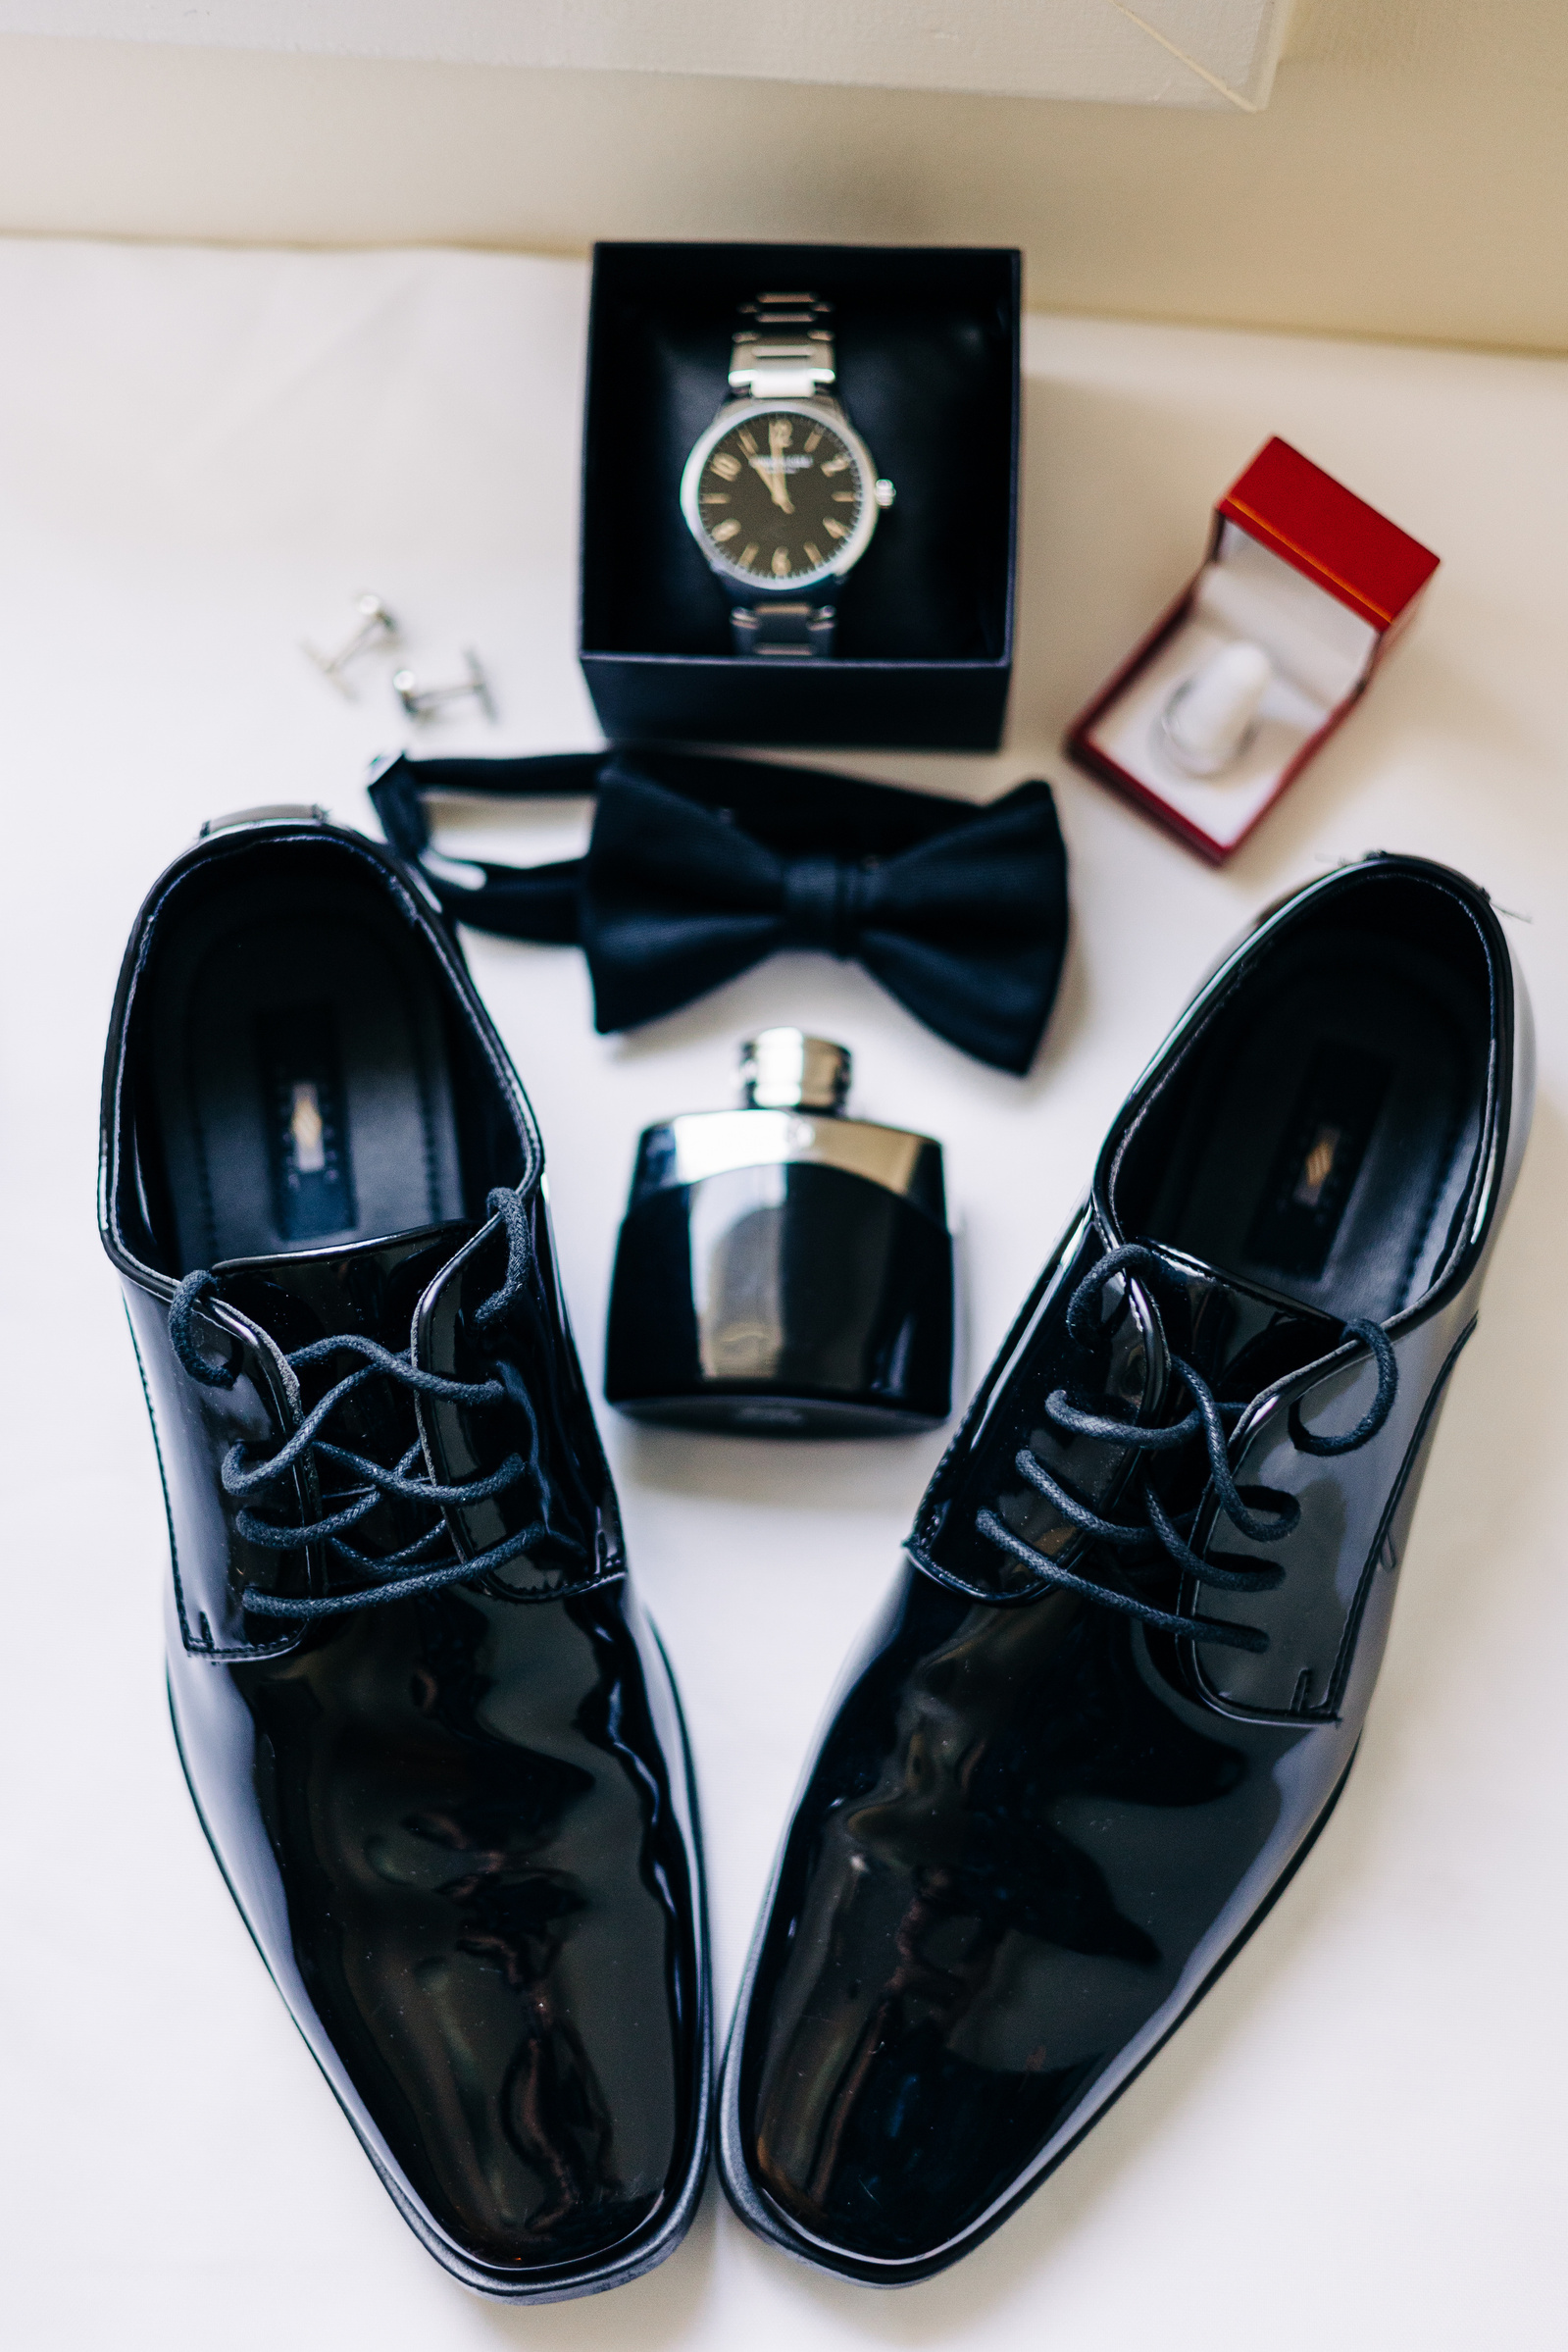 groom wedding detail flat lay featuring shoes, cologne, watch and tie